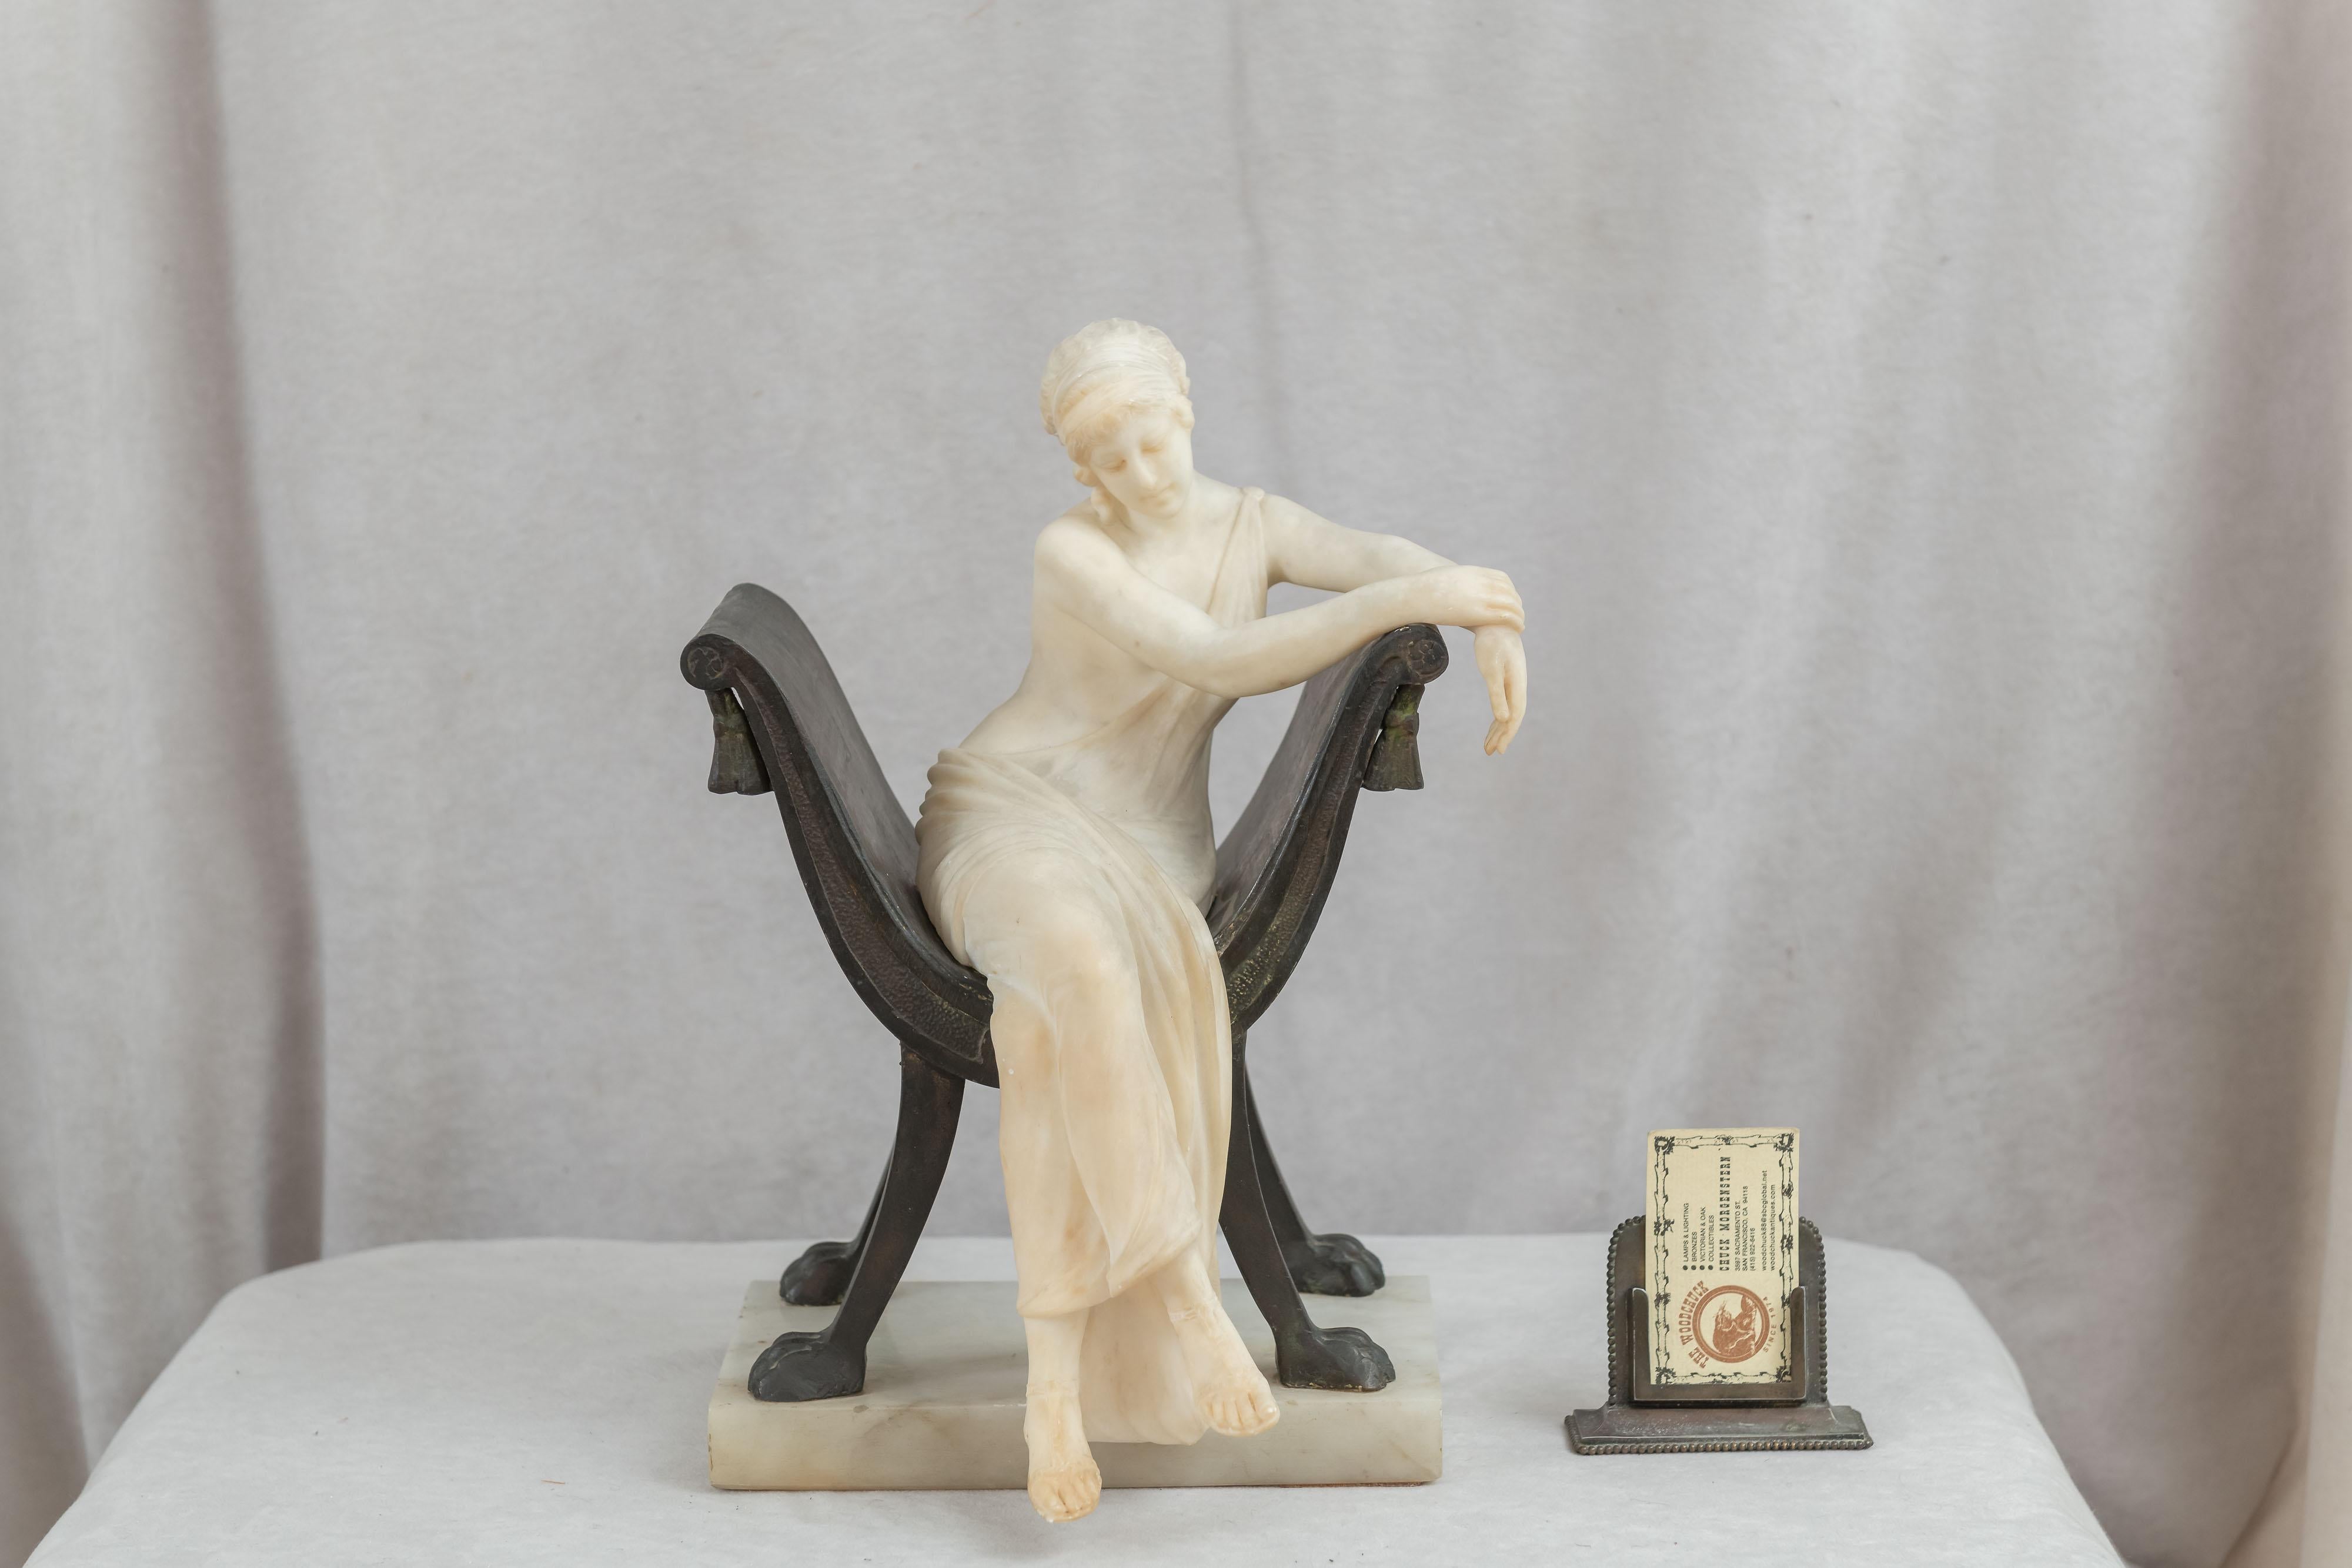 This most impressive example of what an artist can do with 2 mediums, is all here. The young lady is delicately hand carved in alabaster and showing off the artist's ability to create a very life-like figure. Seated on a bronze chair, the sculpture